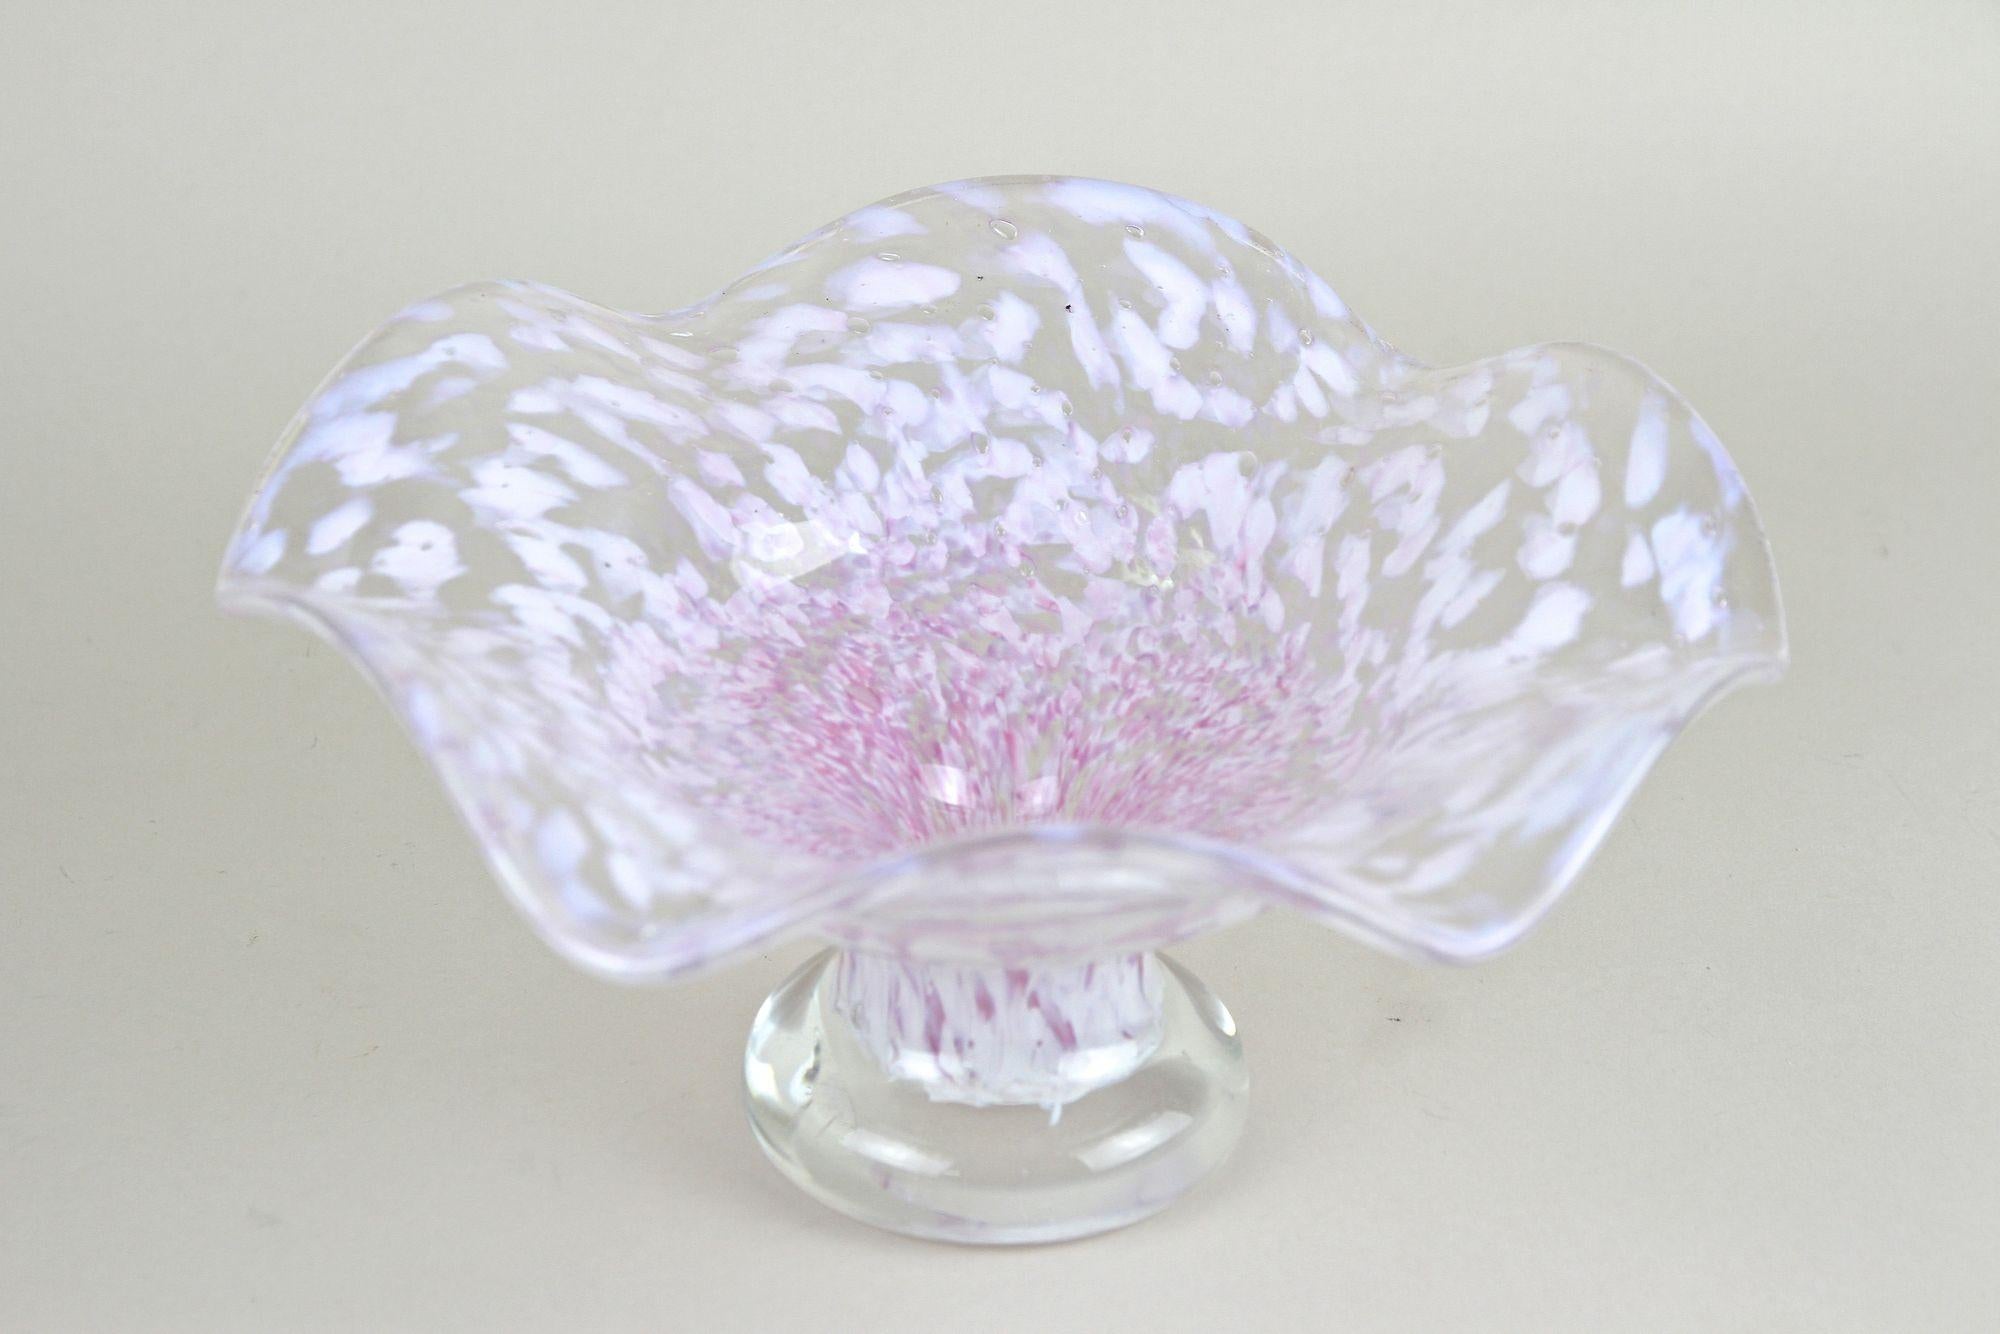 Lovely mid-century Murano glass centerpiece or bowl out of the famous workshops in Italy coming from the late mid century around 1960/70. A real classy piece of Murano glass art with a nice clear base and an artfully designed, elaborately worked